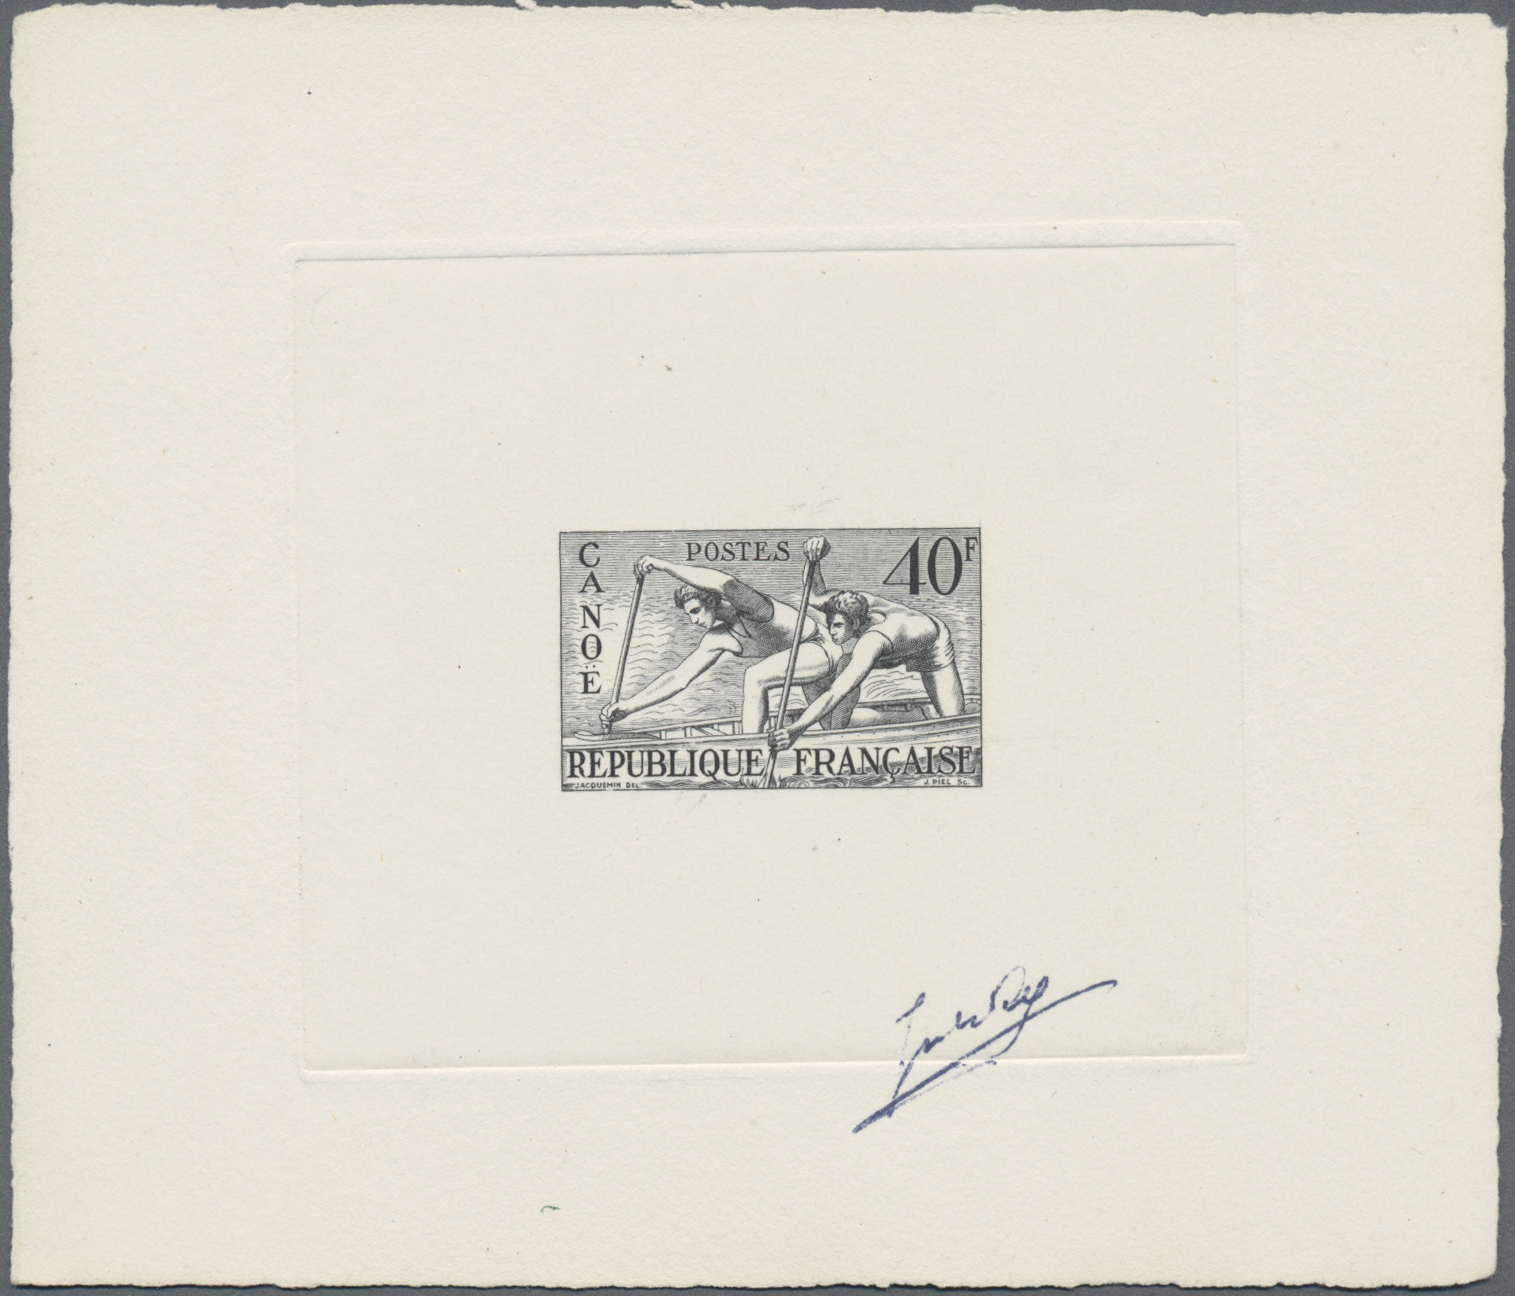 Lot 10628 - thematik: olympische spiele / olympic games  -  Auktionshaus Christoph Gärtner GmbH & Co. KG 51th Auction - Day 4